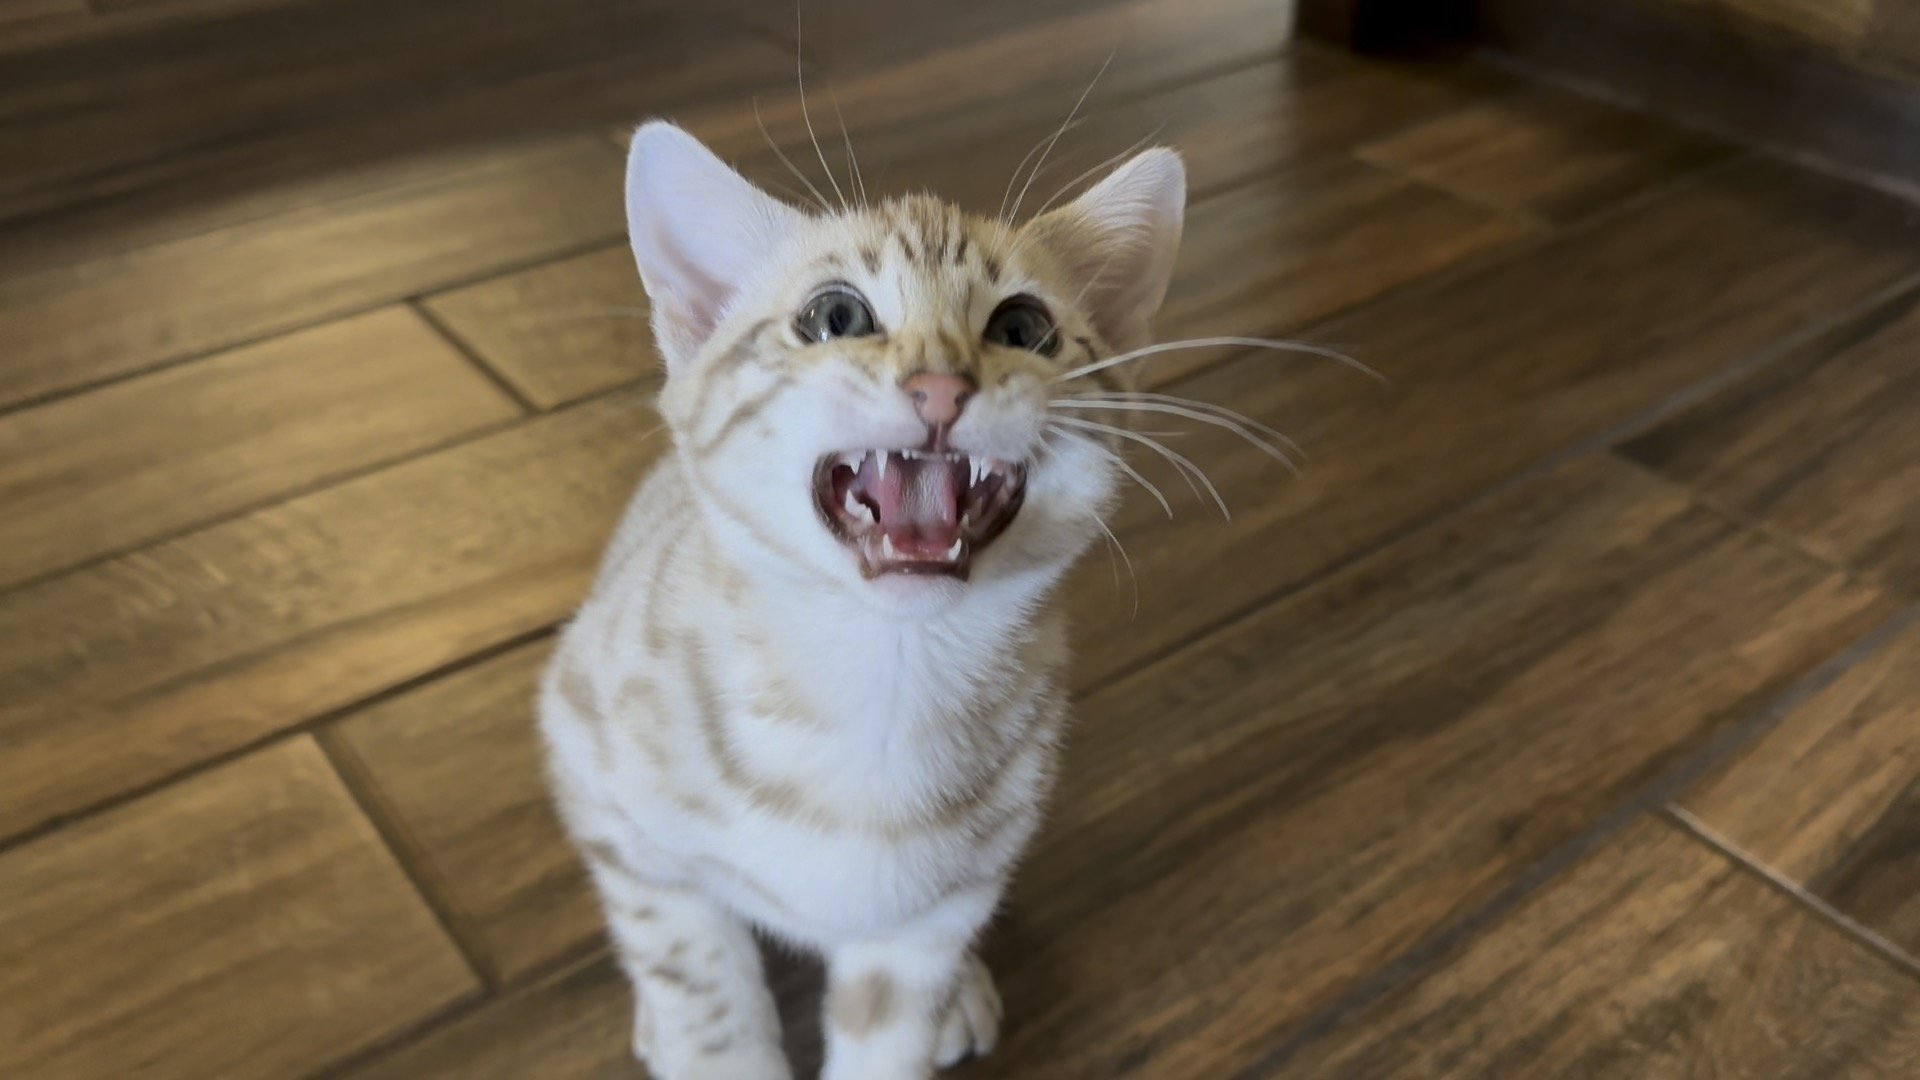 A Bengal Kitten with its mouth open is standing on a wooden floor.